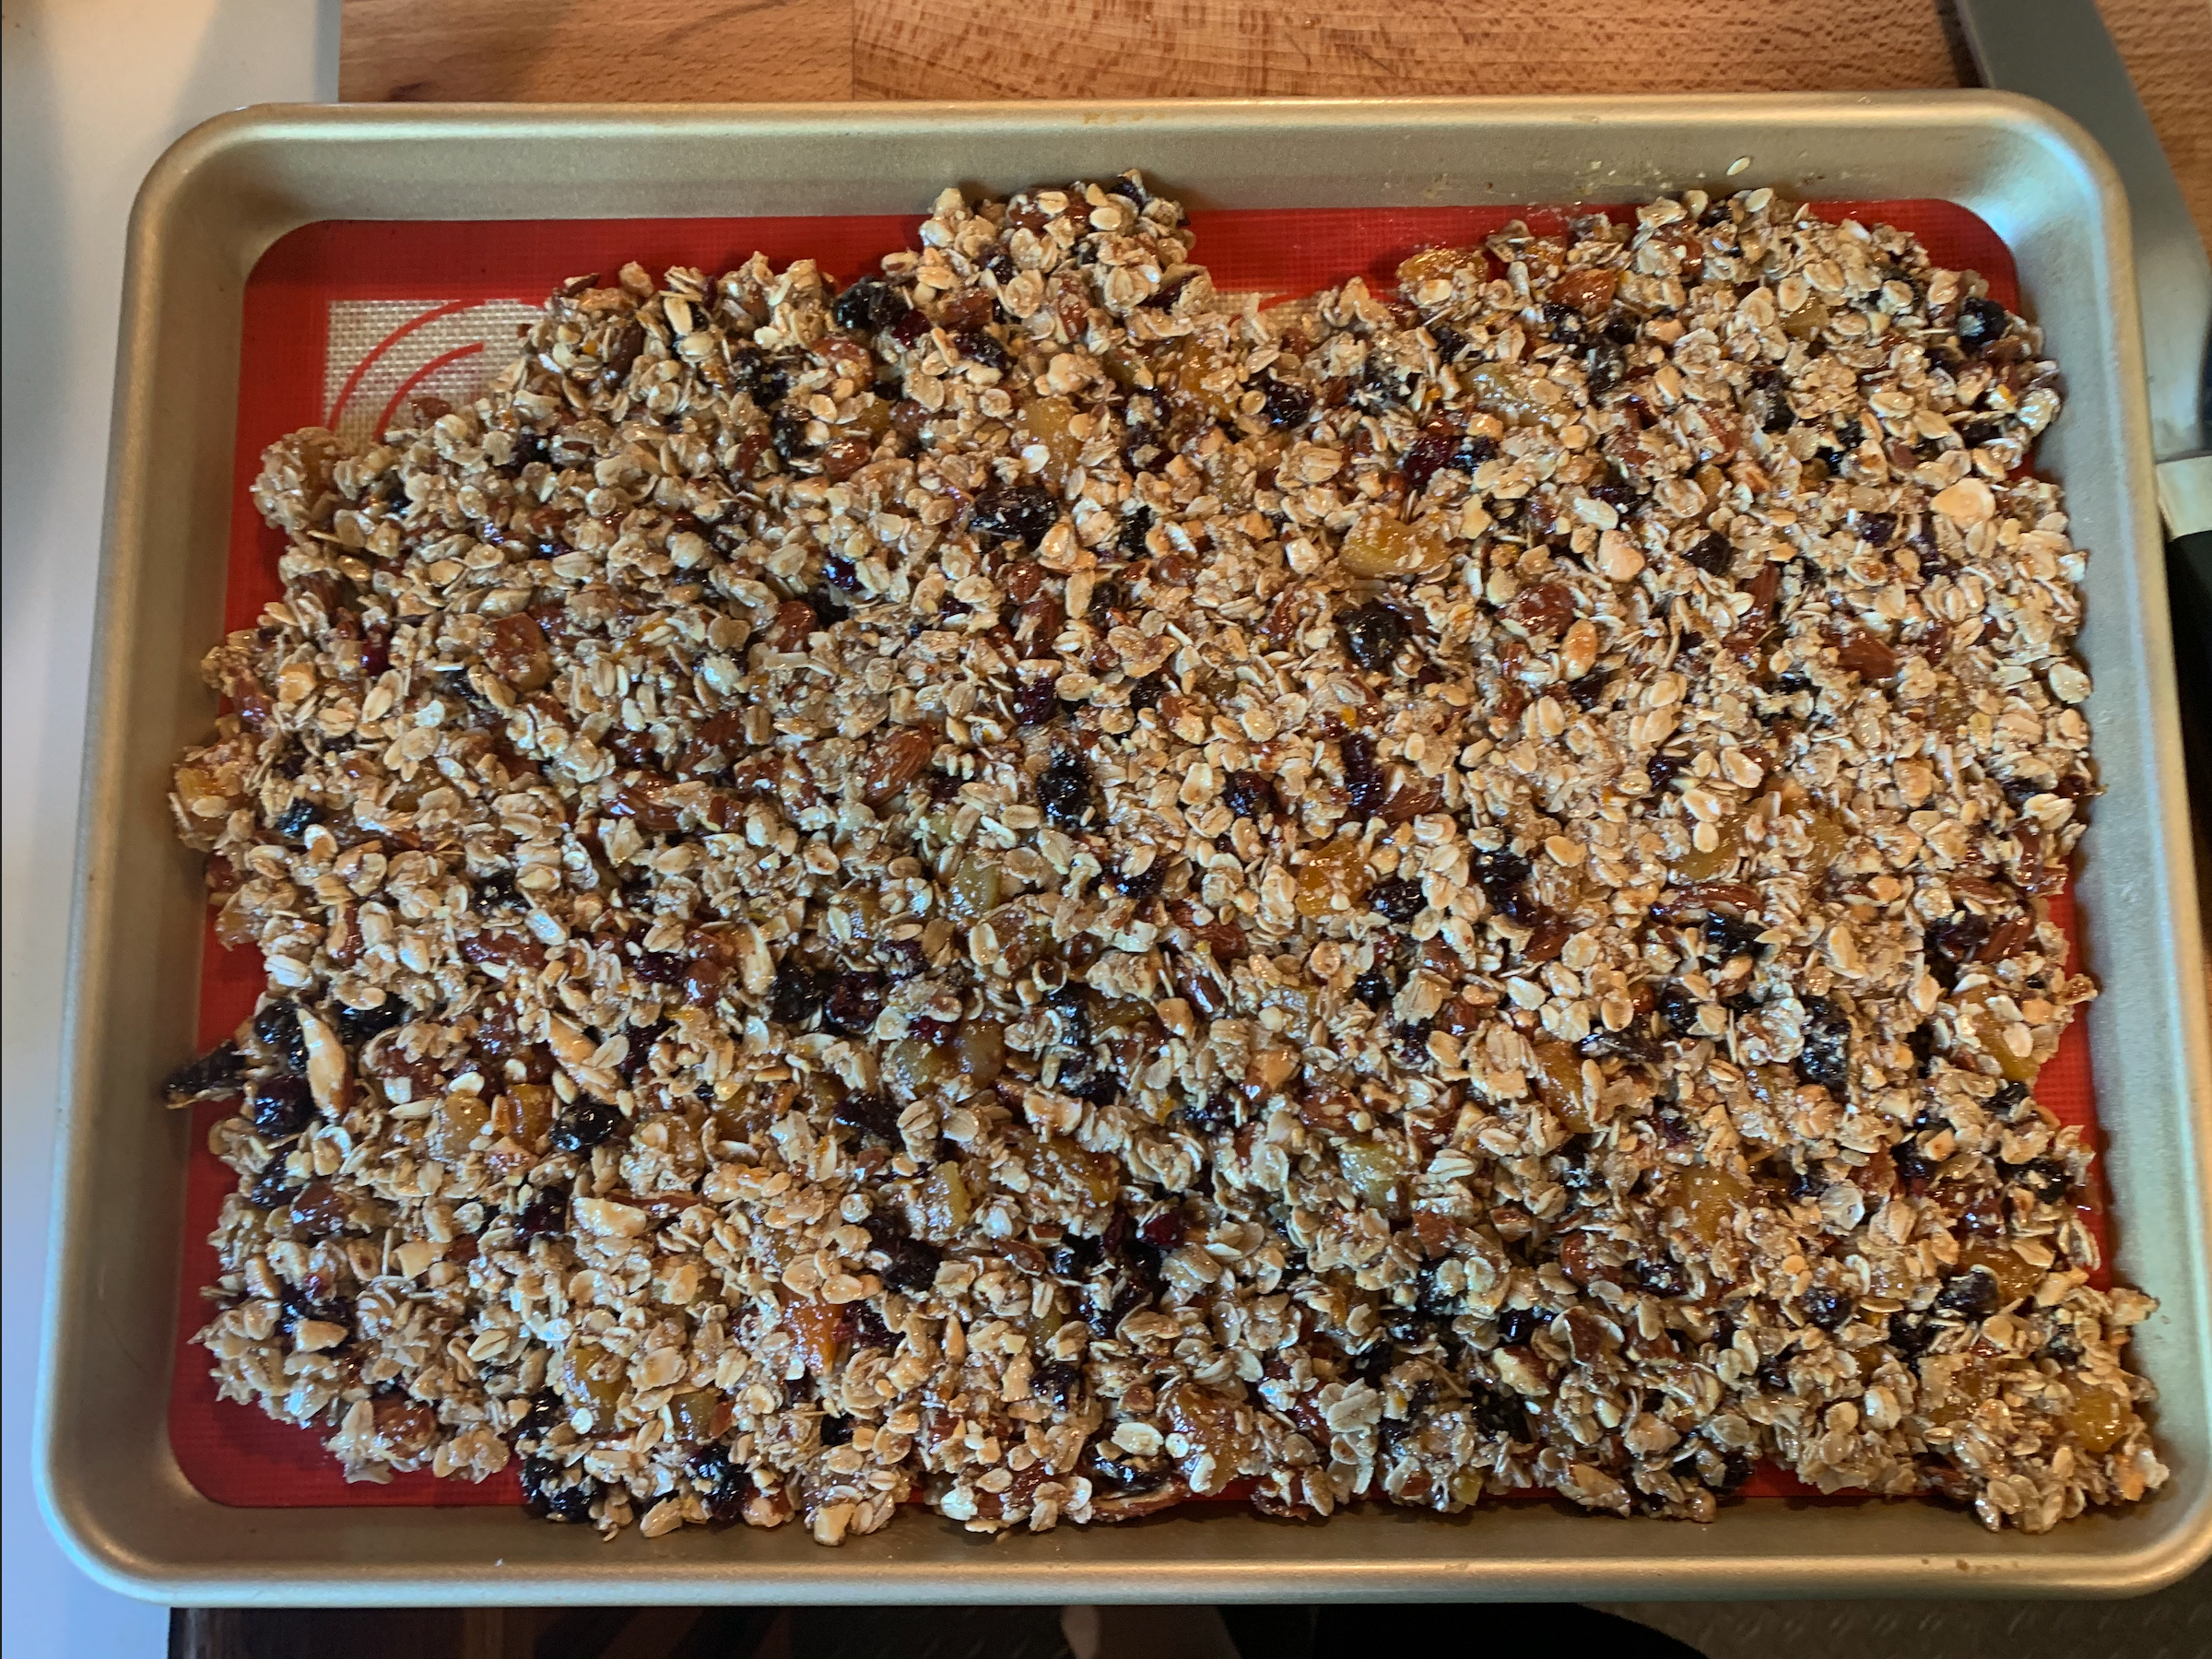 Granola spread out on pan